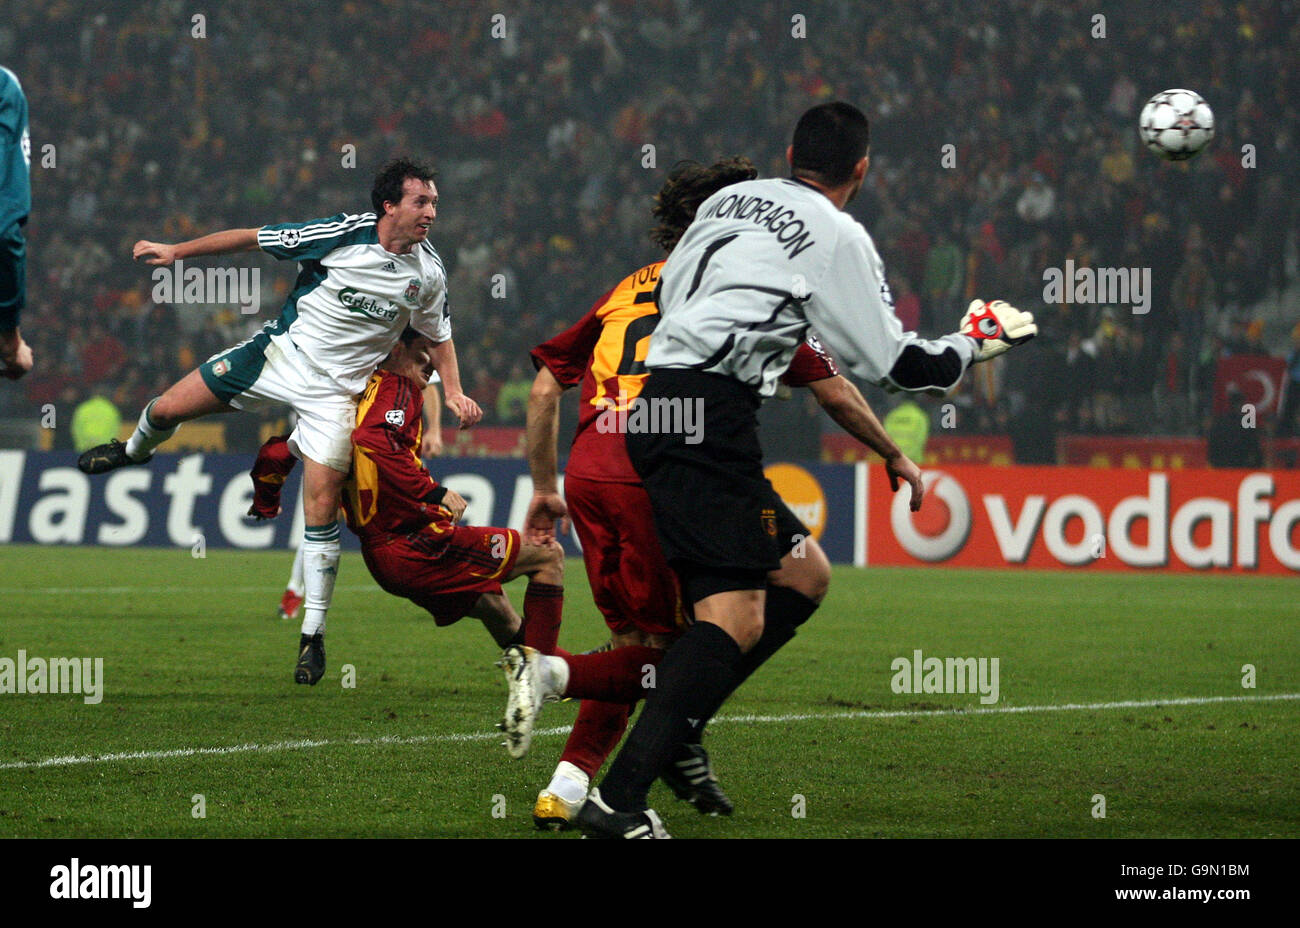 Soccer - UEFA Champions League - Group C - Galatasaray v Liverpool - Ataturk Olympic Stadium. Liverpool's Robbie Fowler scores his sides second goal past Galatasaray's goalkeeper Faryd Mondragon Stock Photo